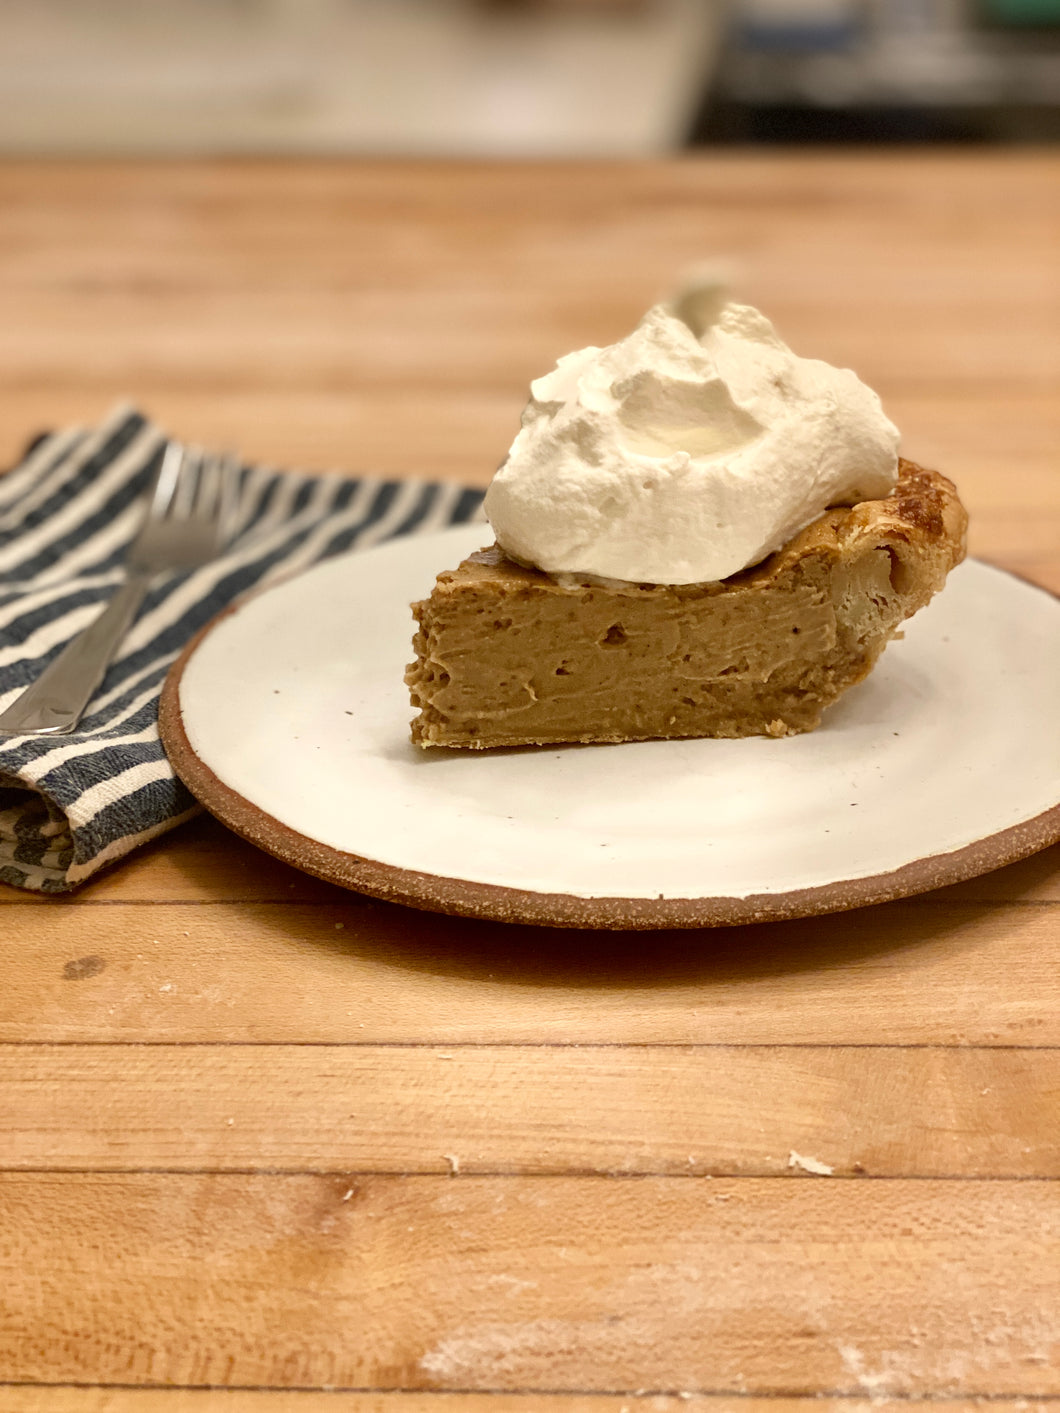 Gingerbread Cheesecake Pie